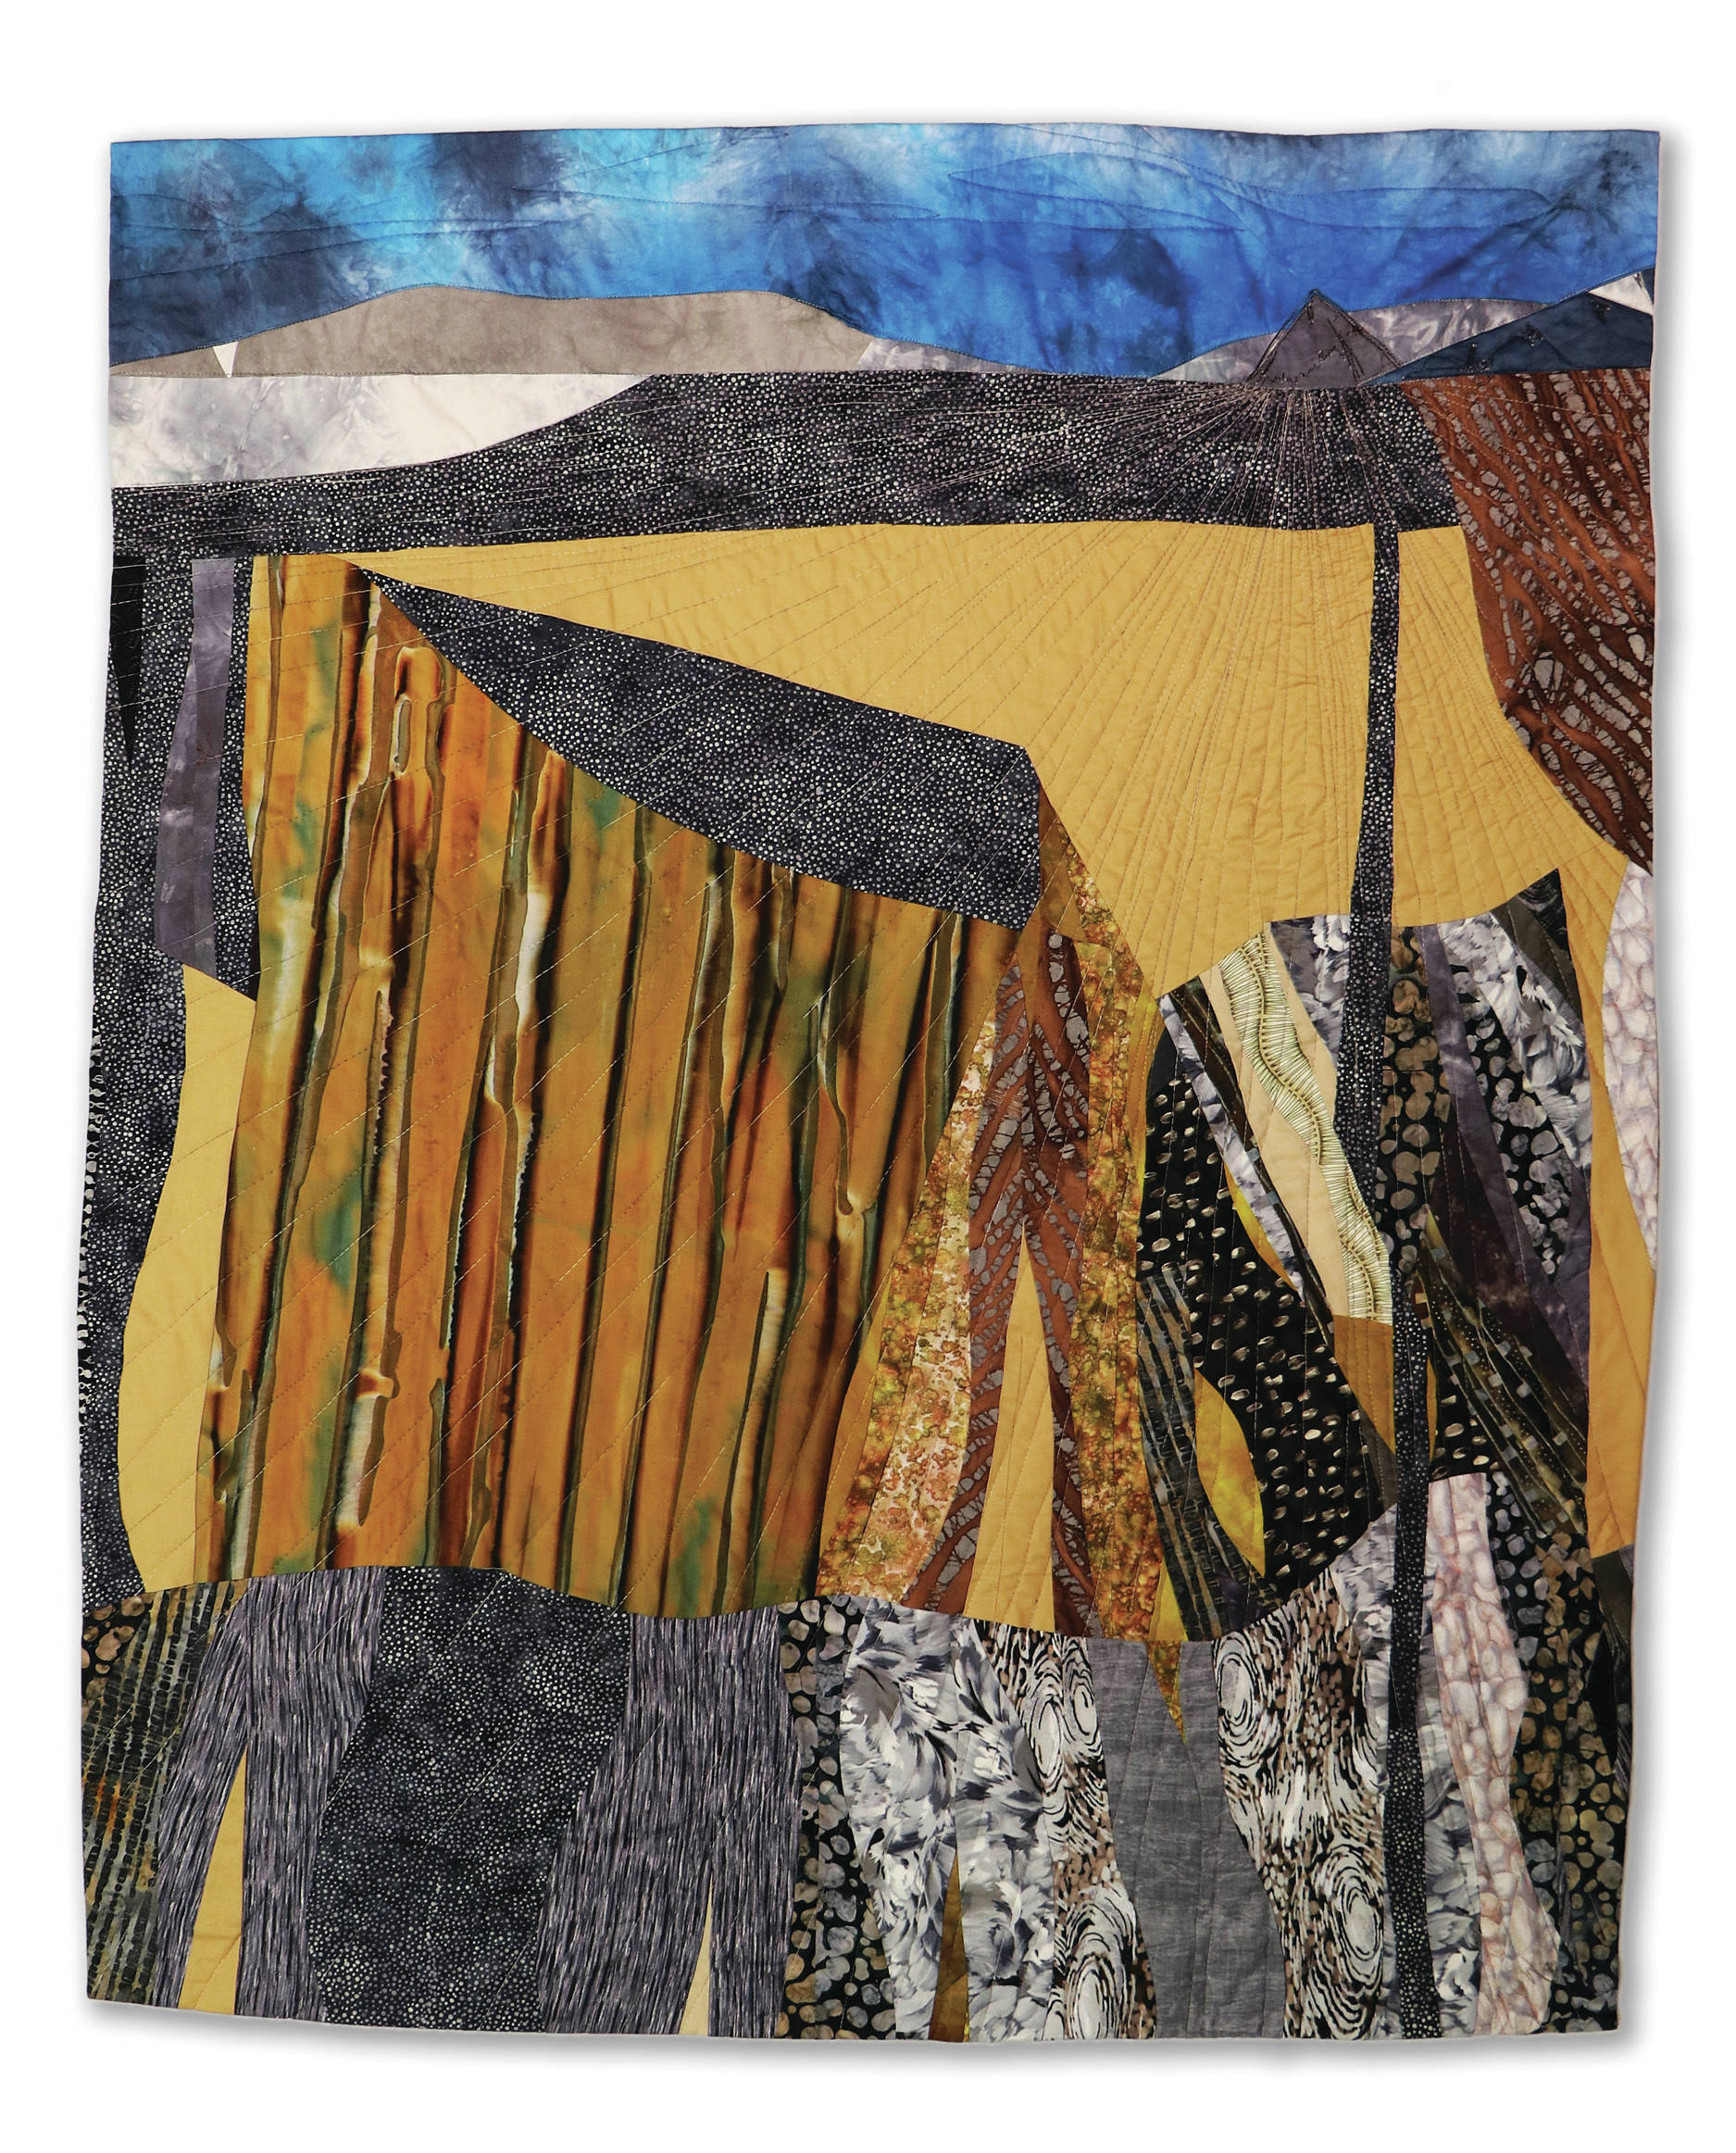 Nan Thompson’s quilt, “Copper River,” one of the 45 art quilts featured in “Shifting Tides: Cloth in Convergence,” on exhibit from Oct. 9 to Nov. 28, 2020, at the Pratt Museum in Homer, Alaska. (Photo by K.P. Schaefermeyer)